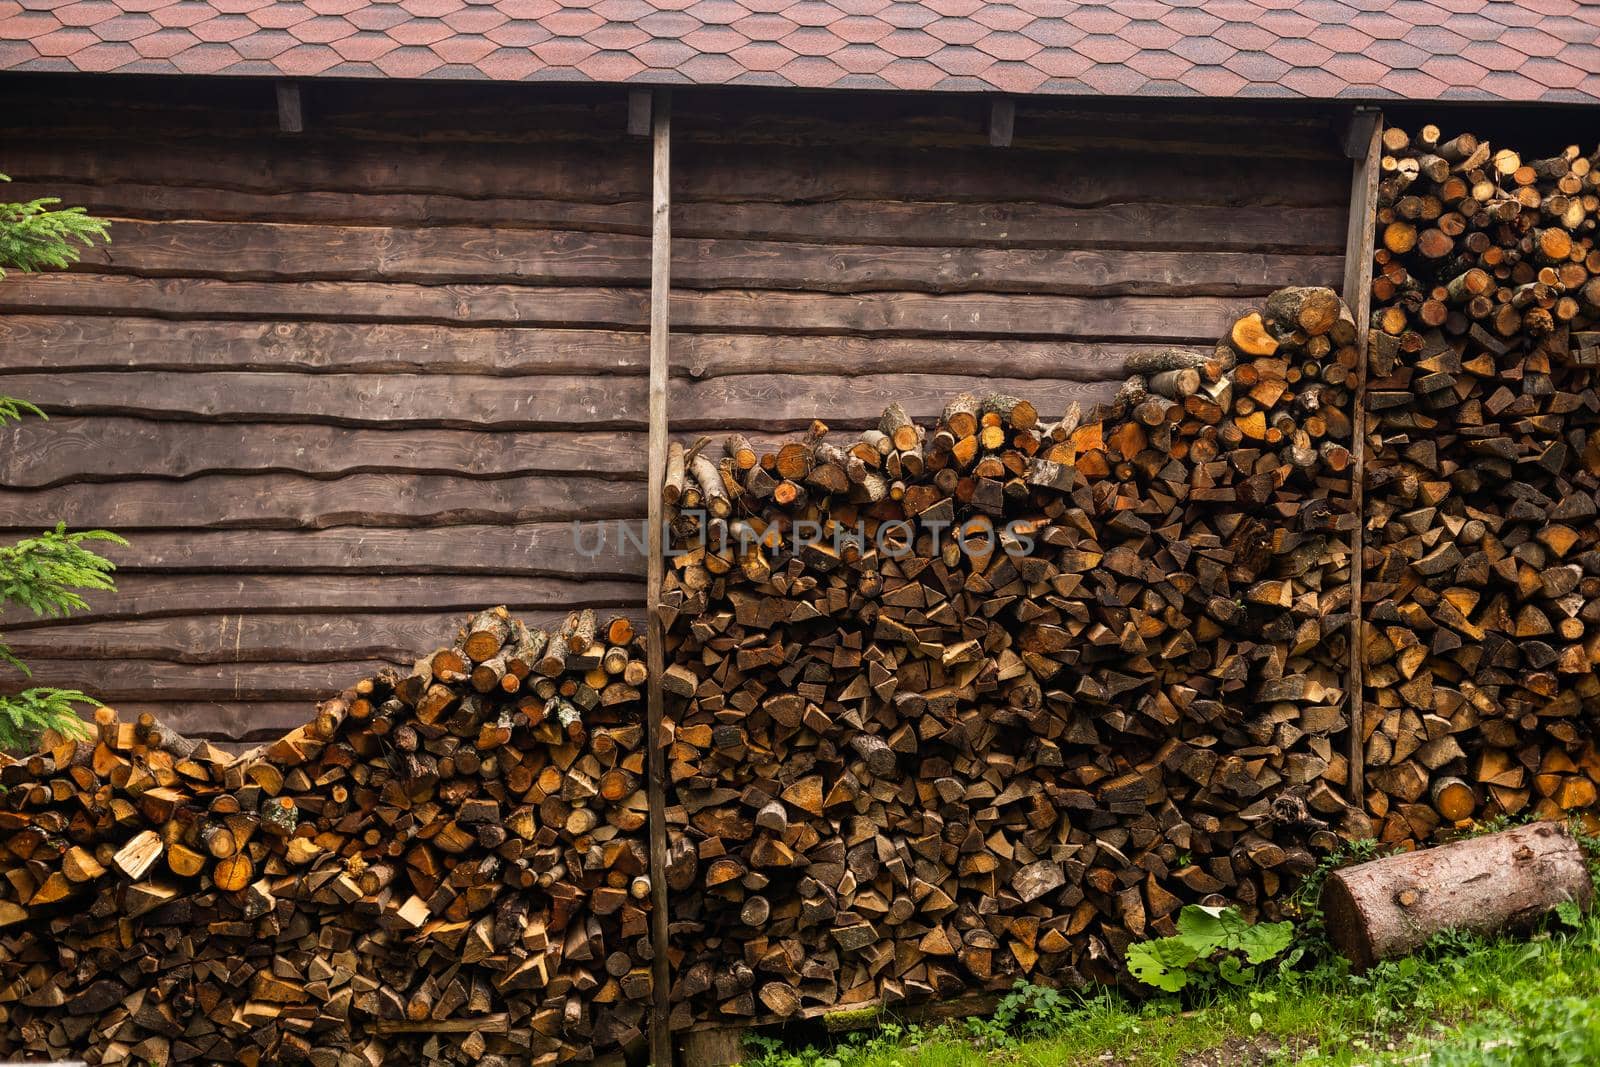 stacked firewood and dry branches. firewood for kindling stoves, barbecue. harvesting firewood for the winter. cutting down old trees. fuel.